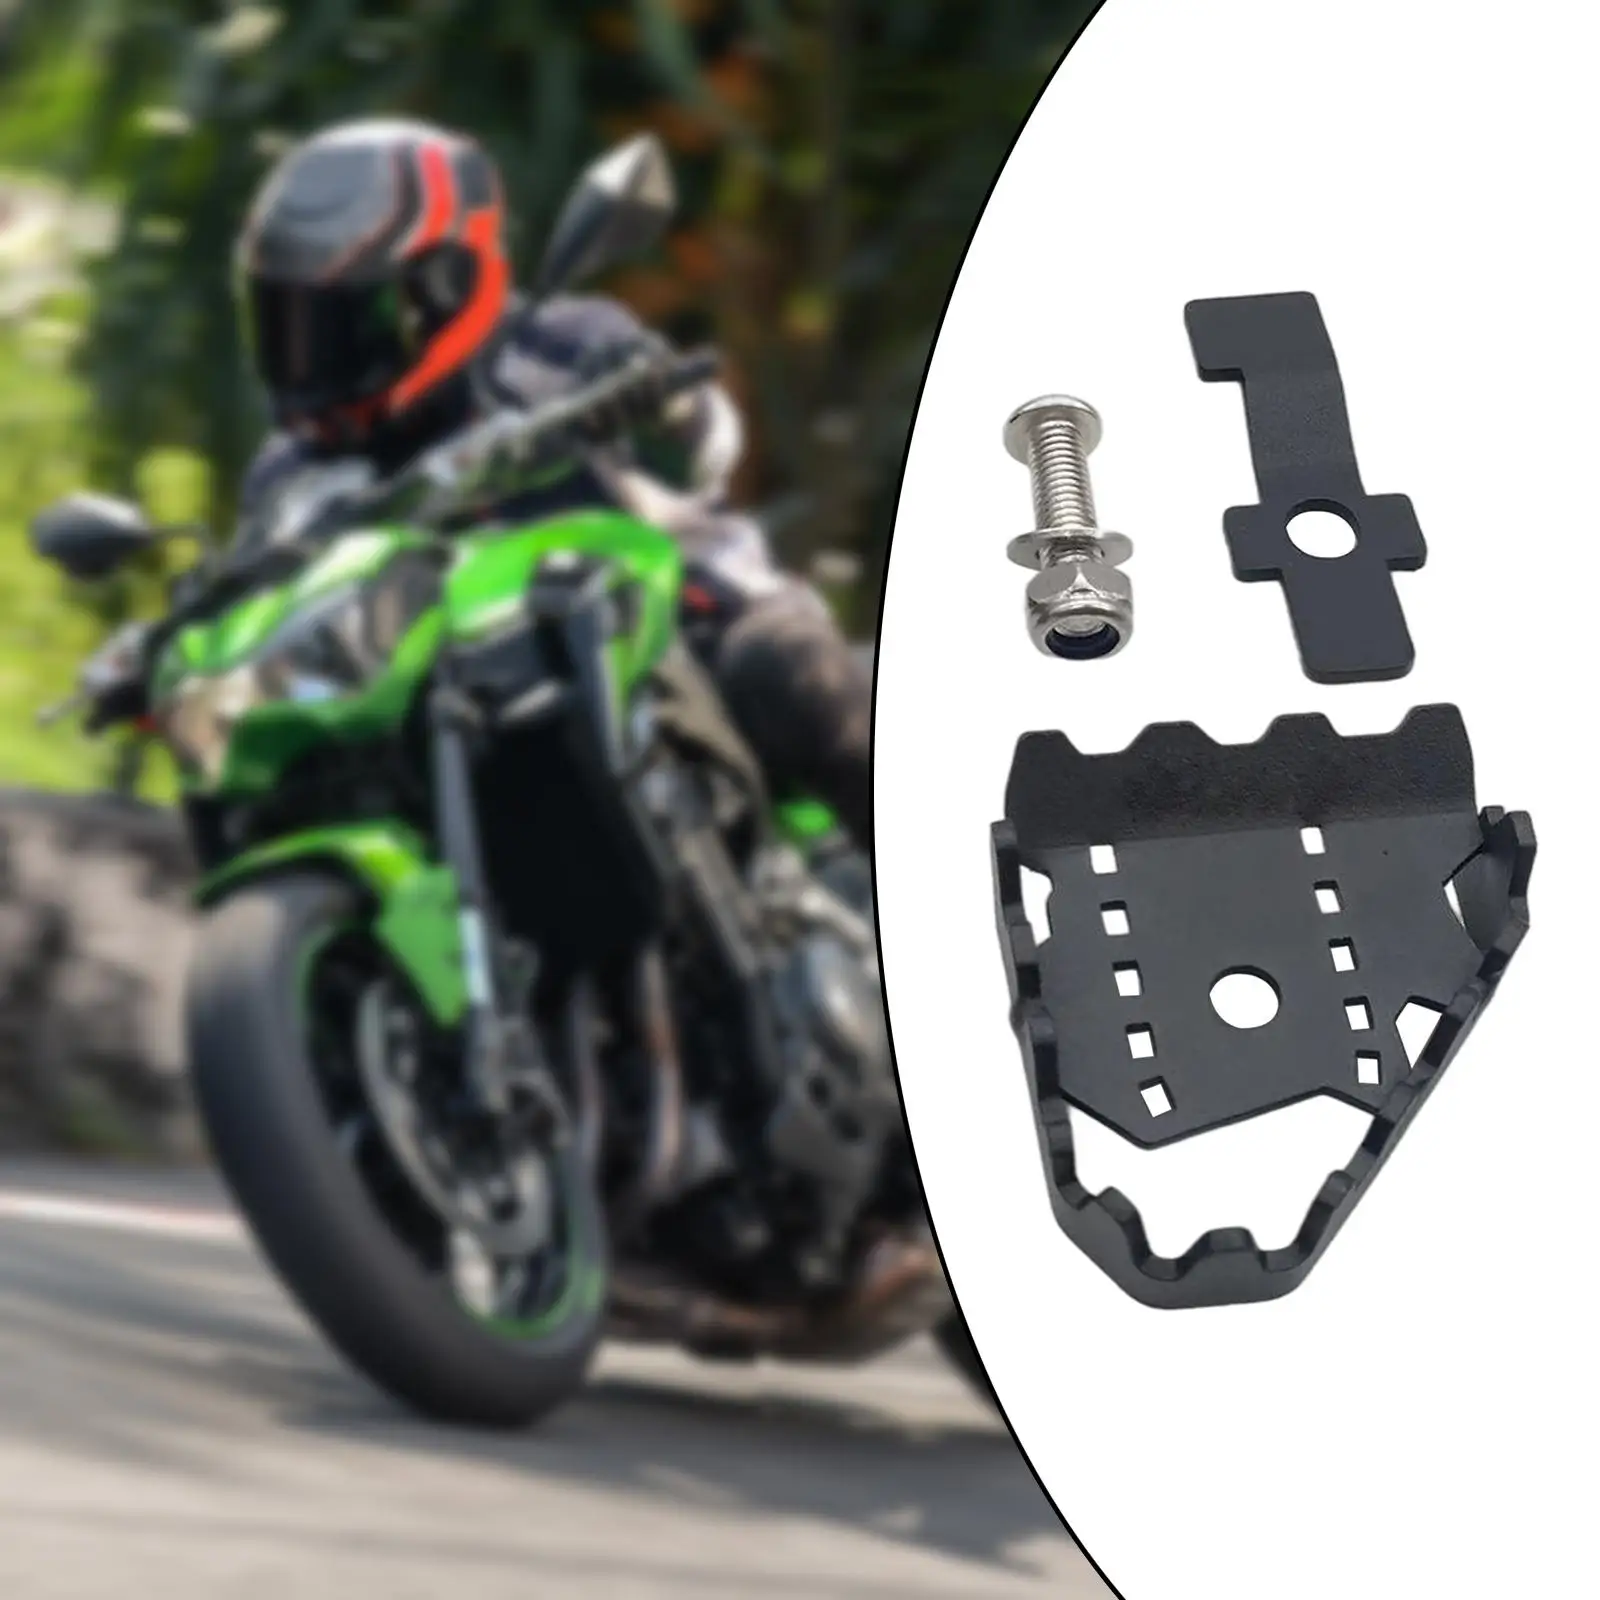 Motorbike Brake Pedal Extension Step Tip Plate Direct Replacement for YAMAHA TENERE700 XTZ700 2019-2021, High Performance